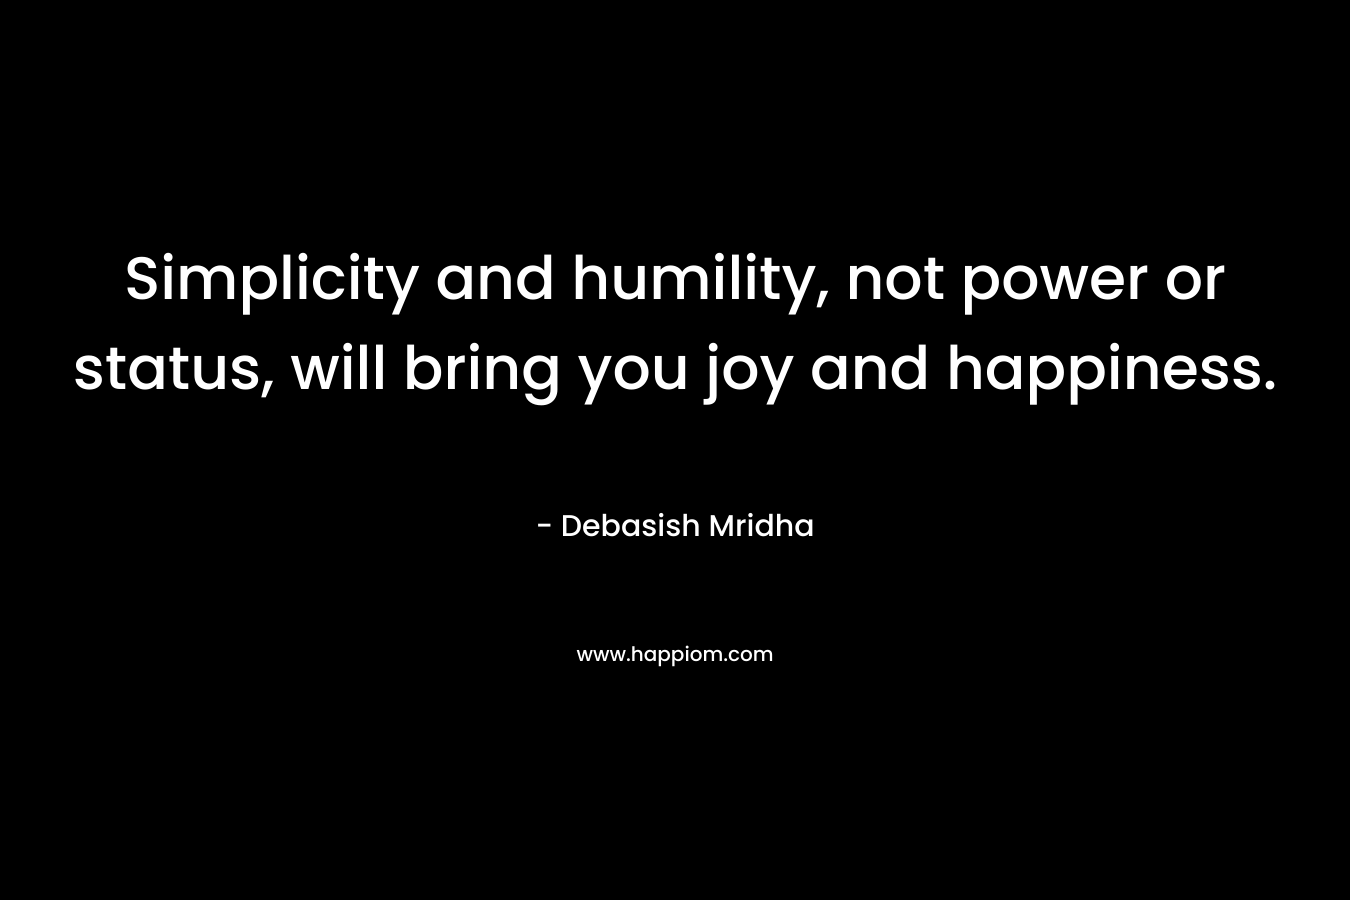 Simplicity and humility, not power or status, will bring you joy and happiness.